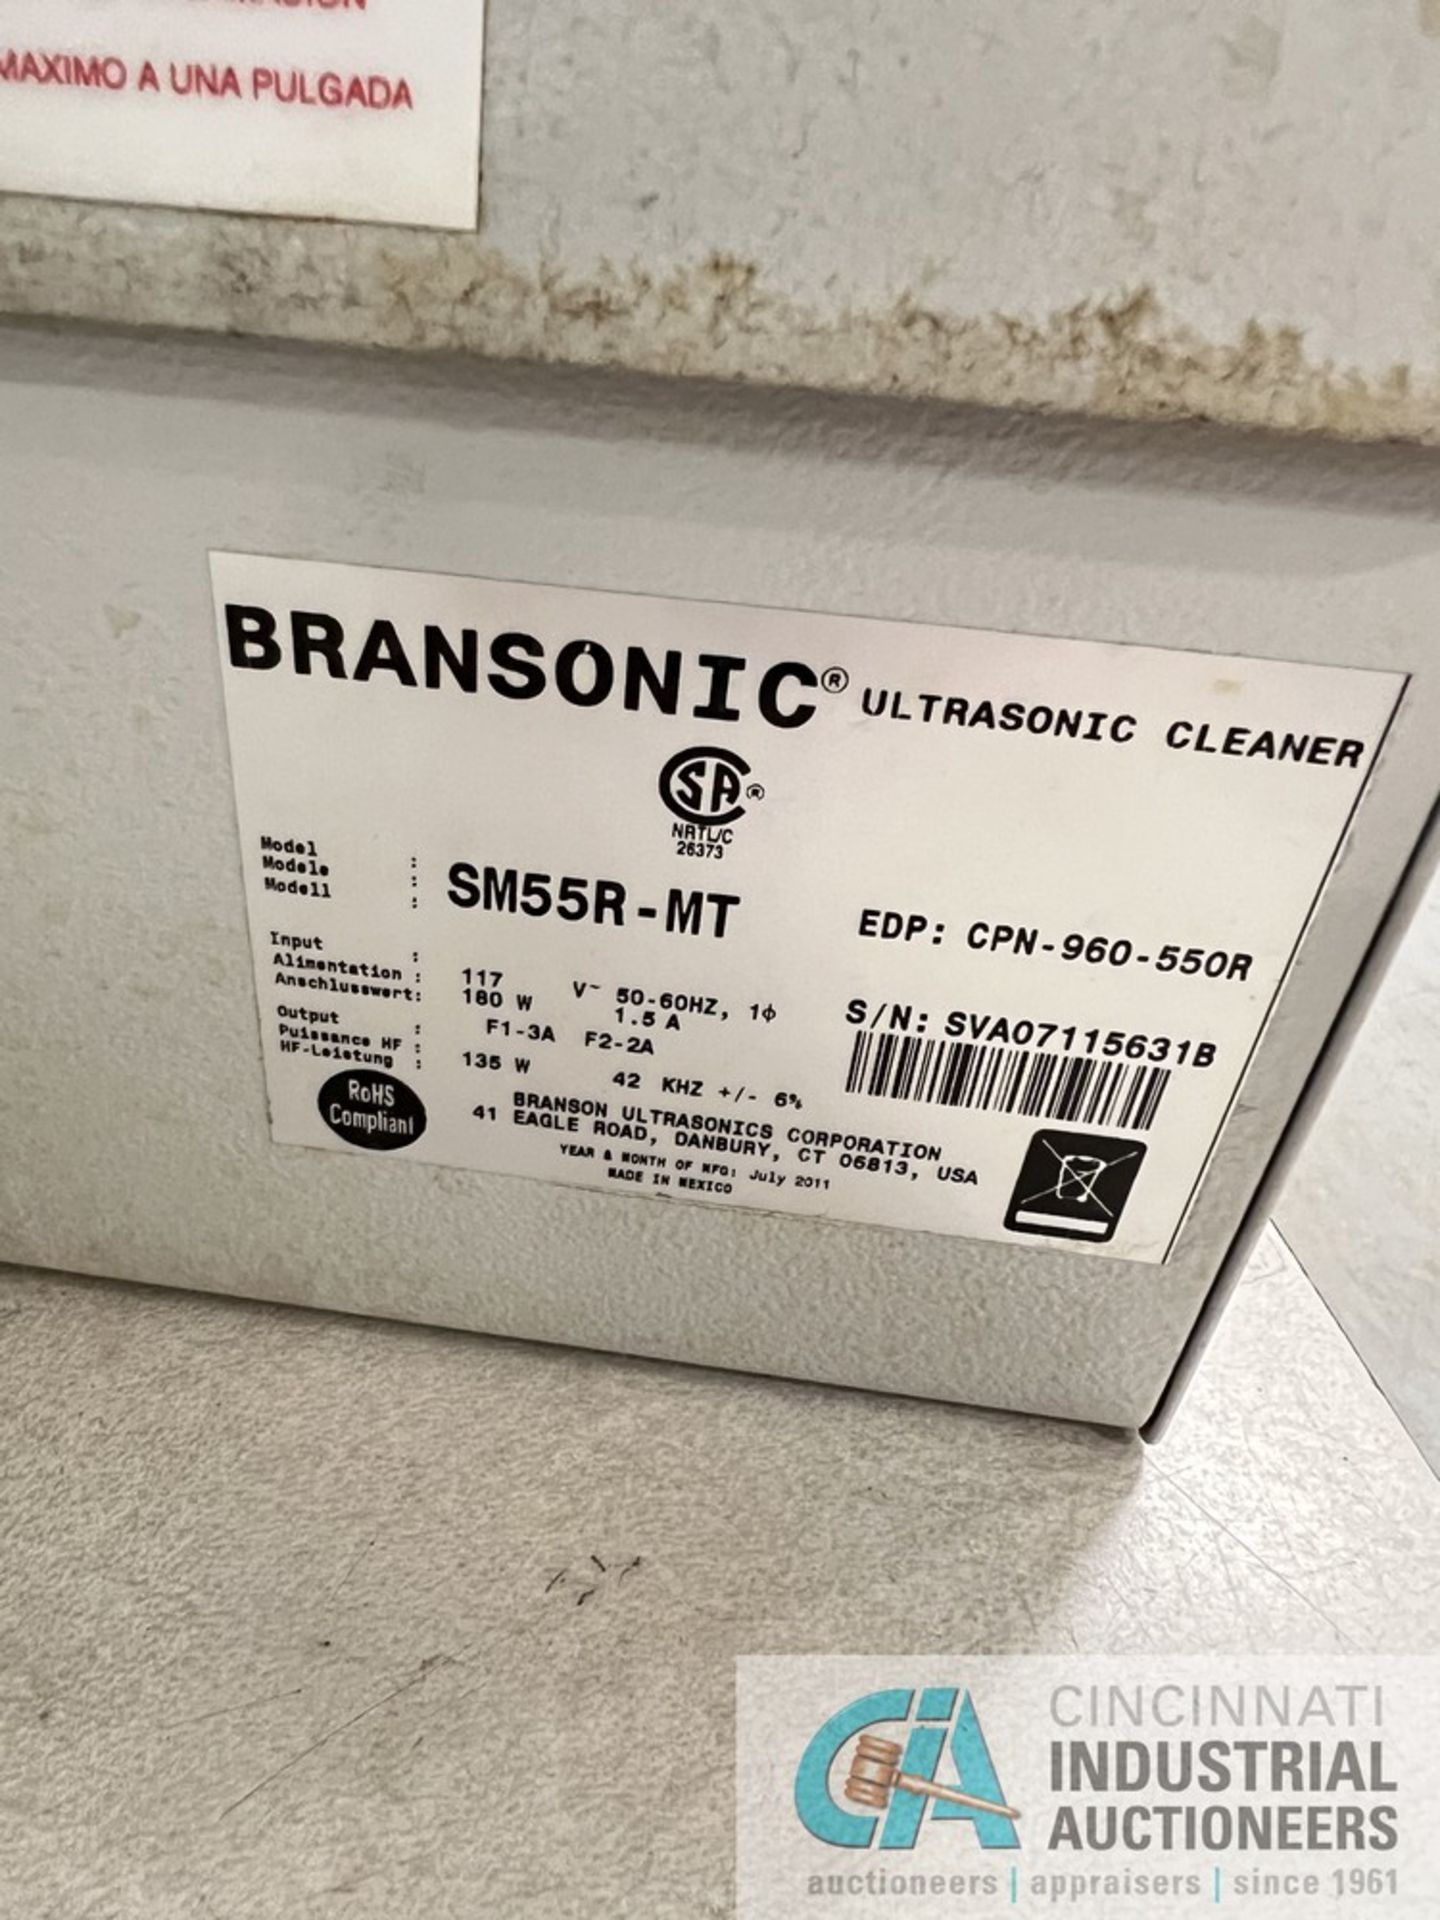 BRANSONIC MODEL SM55R-HT ULTRASONIC CLEANER WITH (3) 1 GALLON BRANSON EC FORMULATED CLEANING - Image 4 of 5